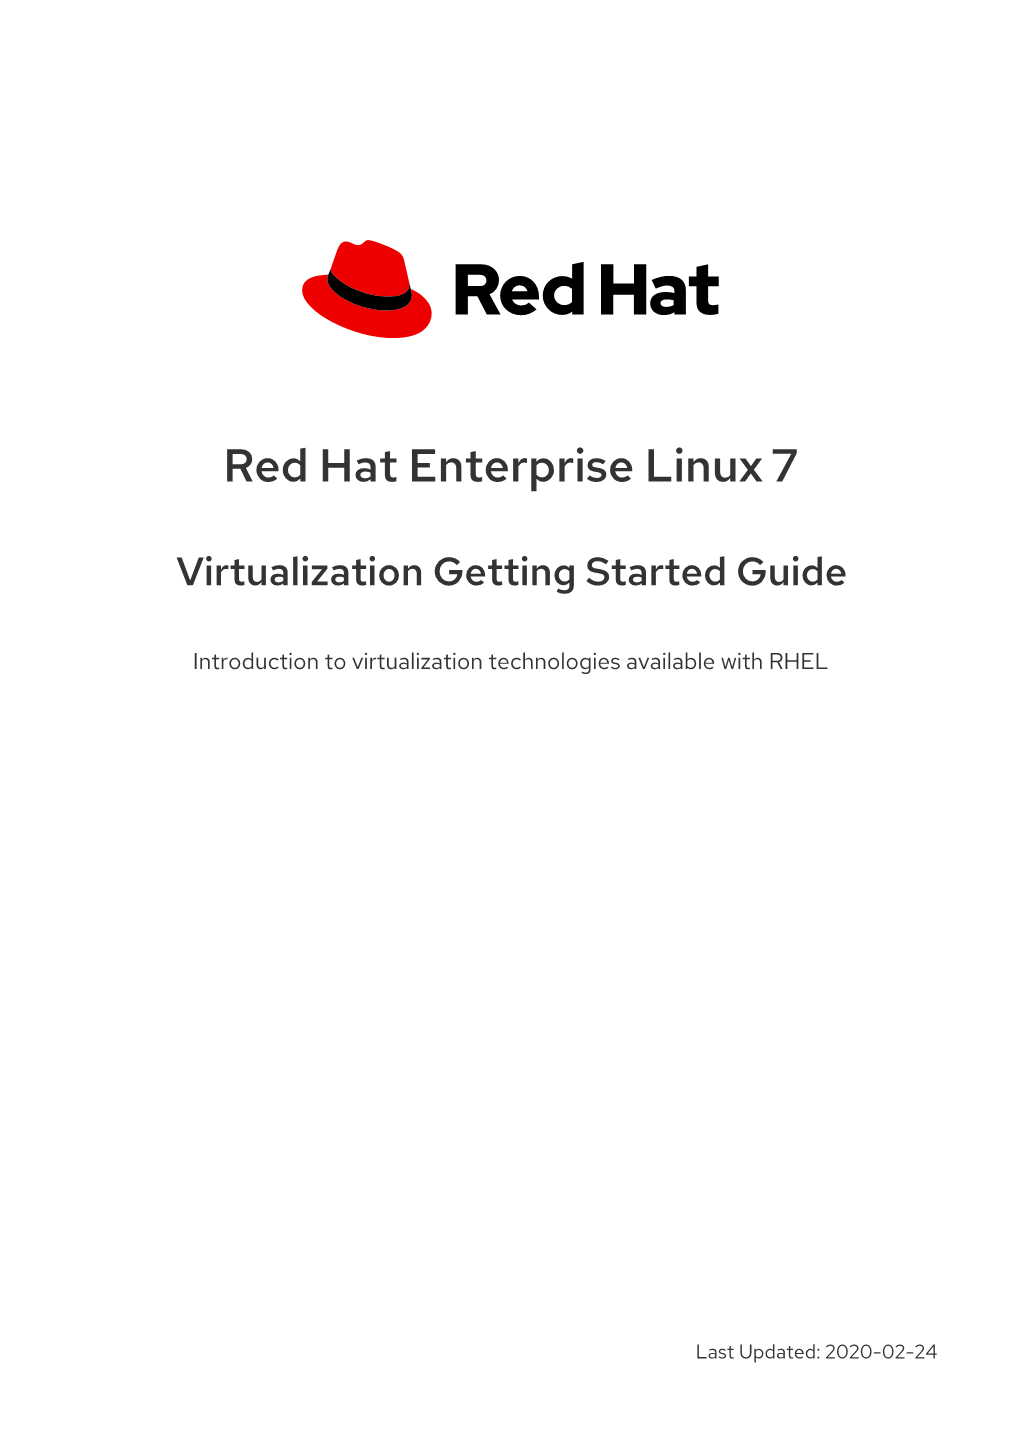 Virtualization Getting Started Guide